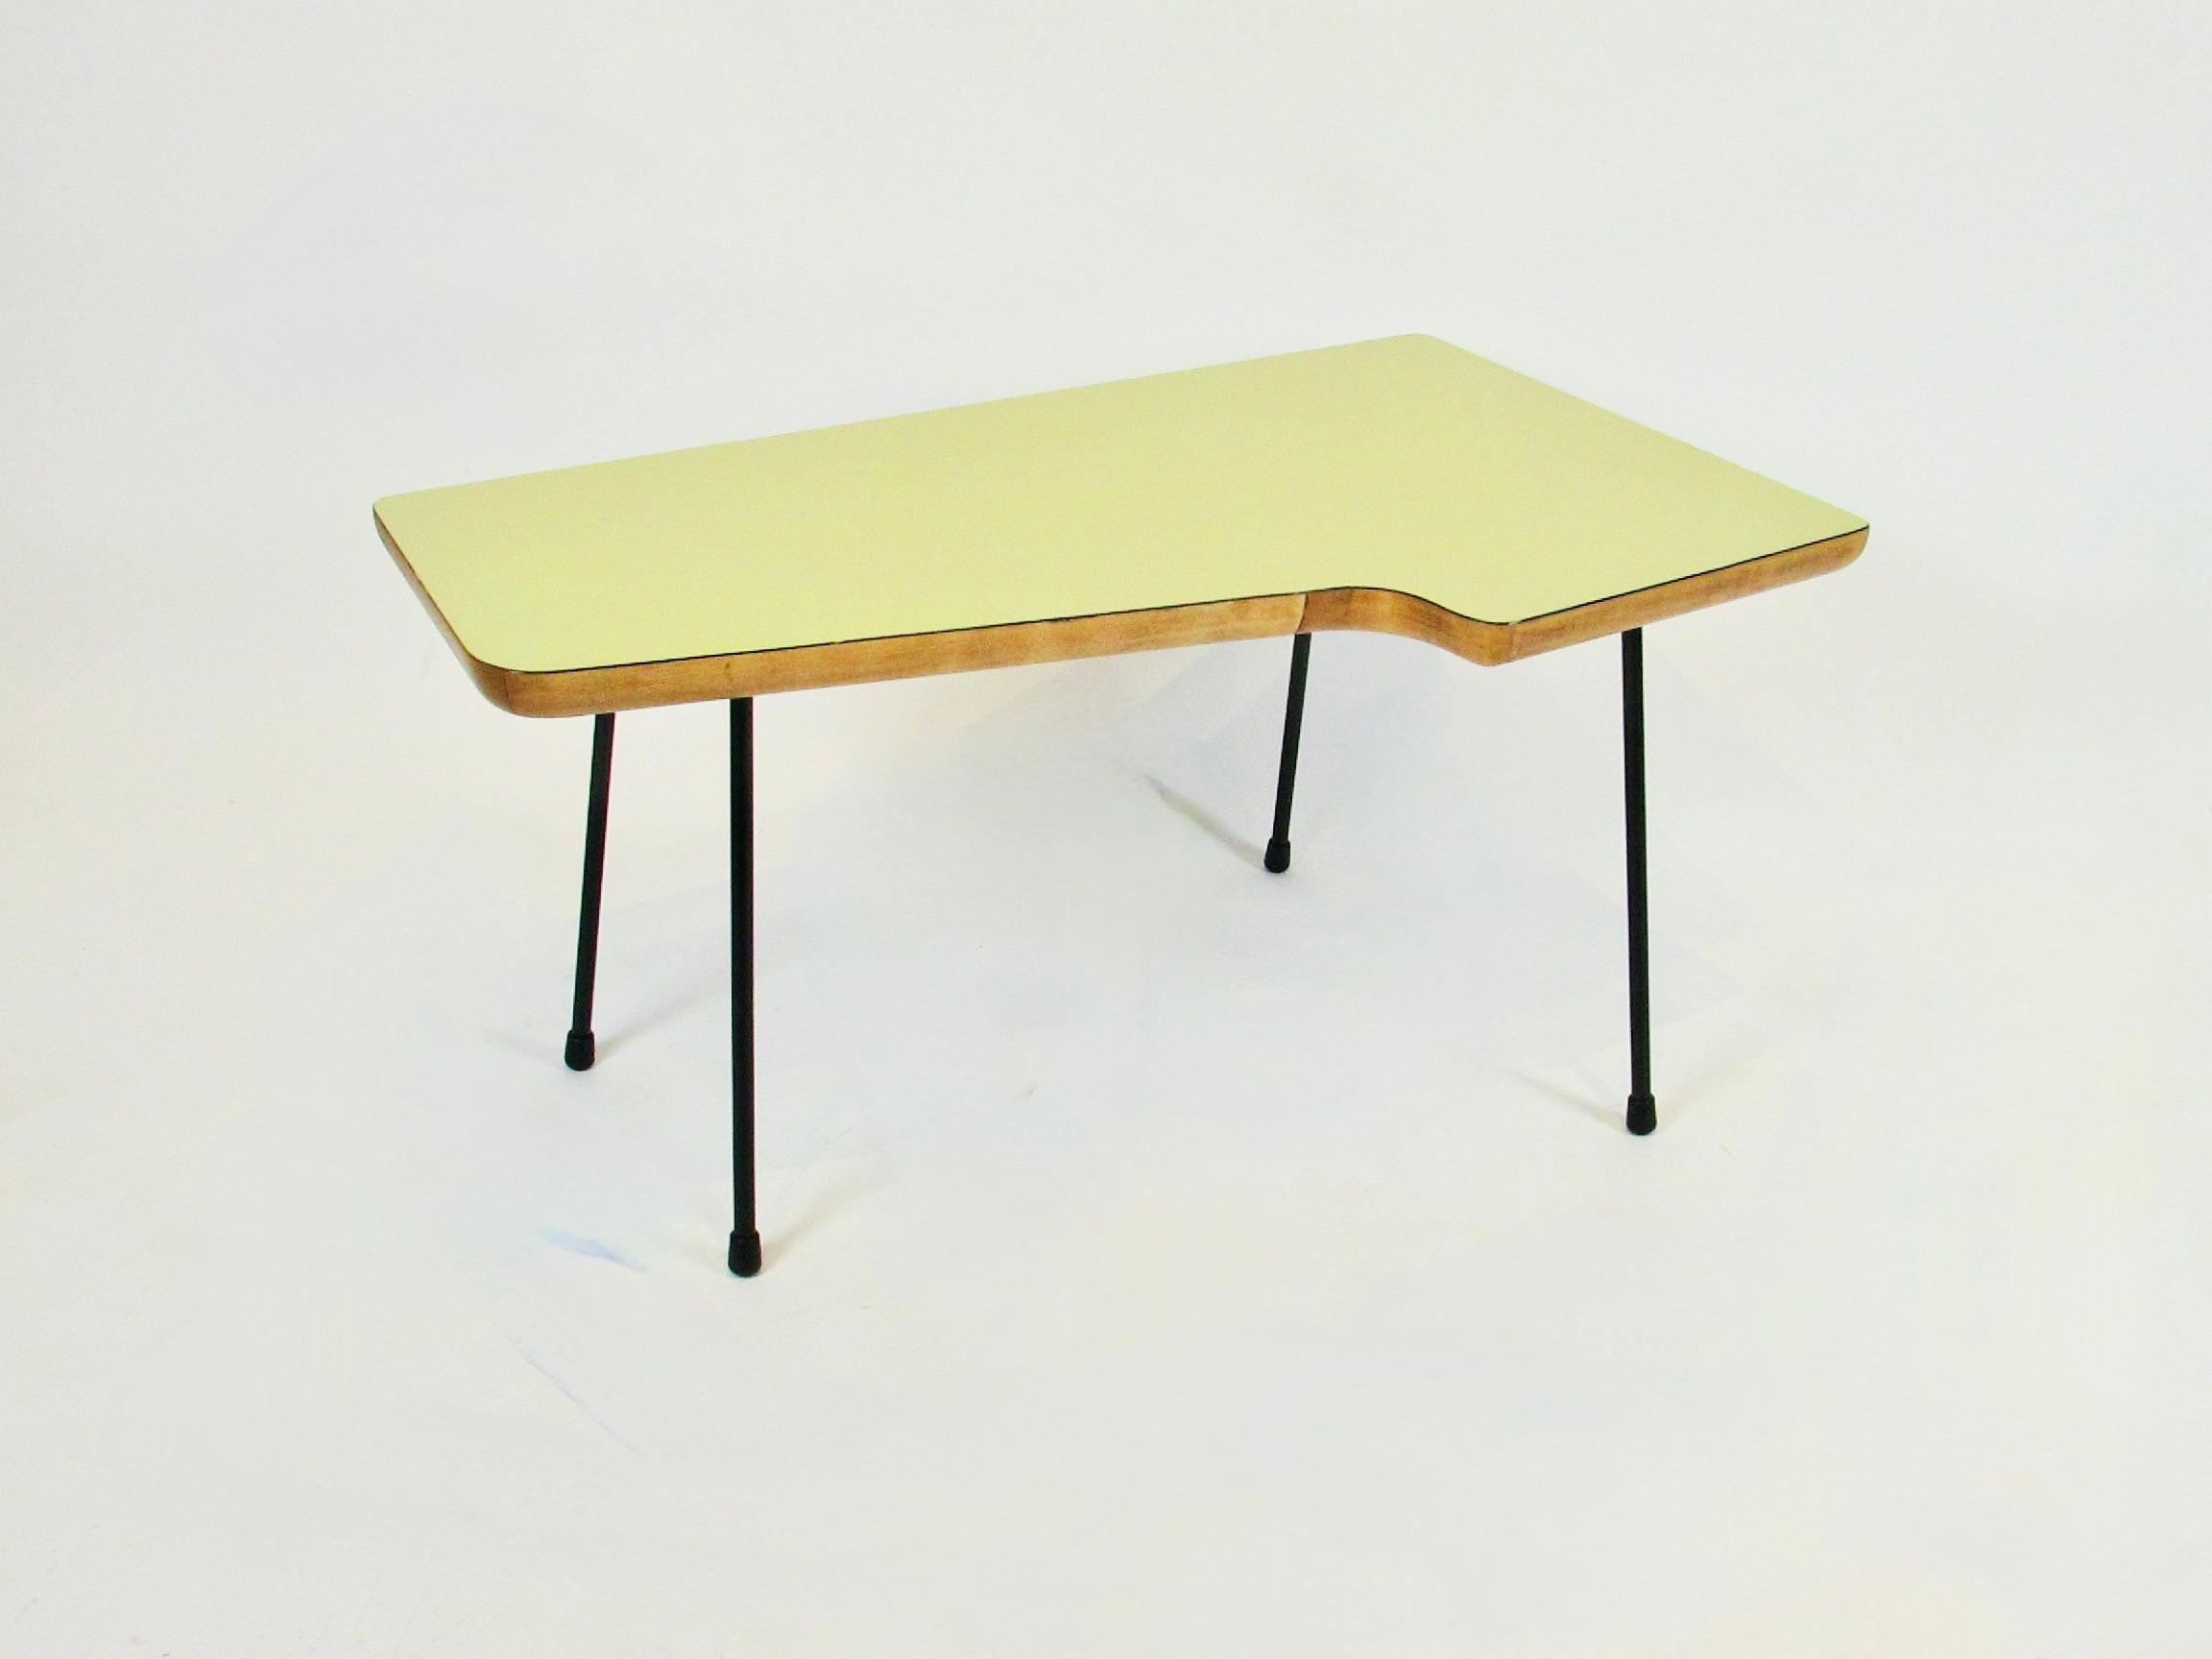 Organic Modern Occasional Table Attributed to Ray Komai and Carter Winter Studio In Good Condition For Sale In Ferndale, MI